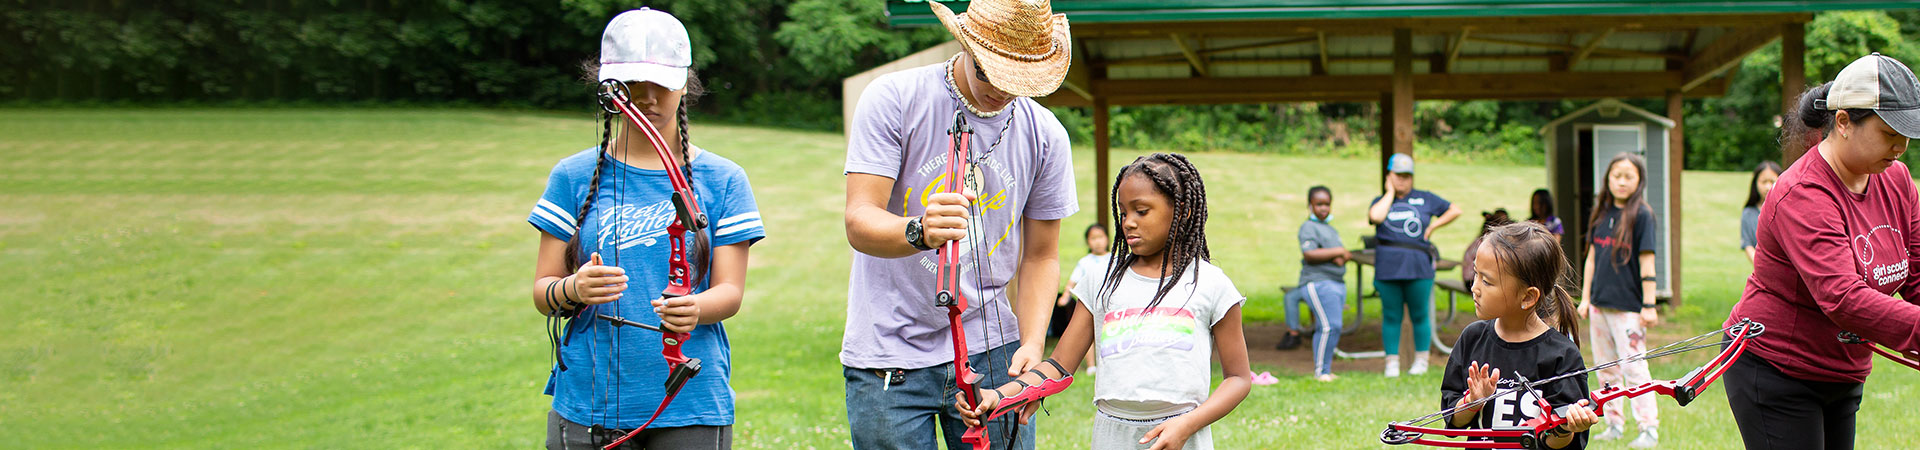  Volunteer in straw hat teaches campers archery  